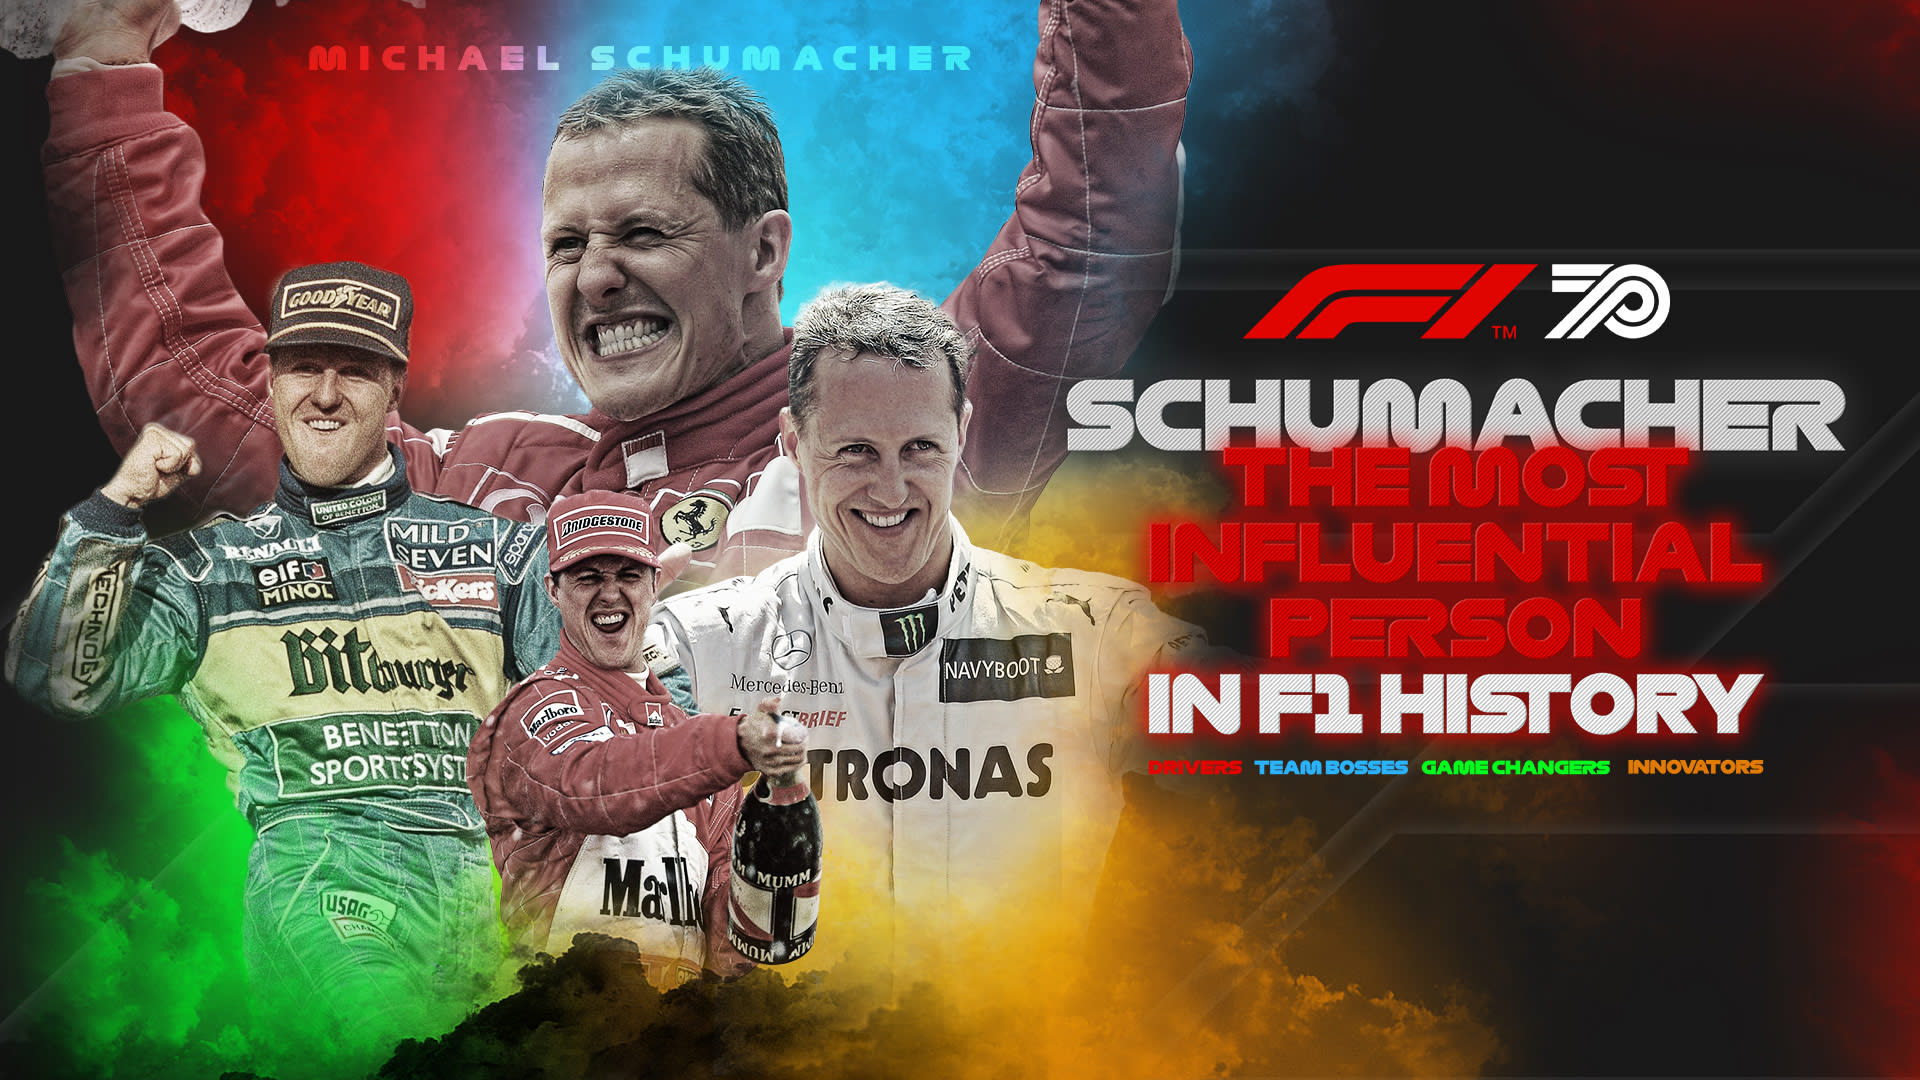 Michael Schumacher voted Most Influential Person in F1 History by fans |  Formula 1®